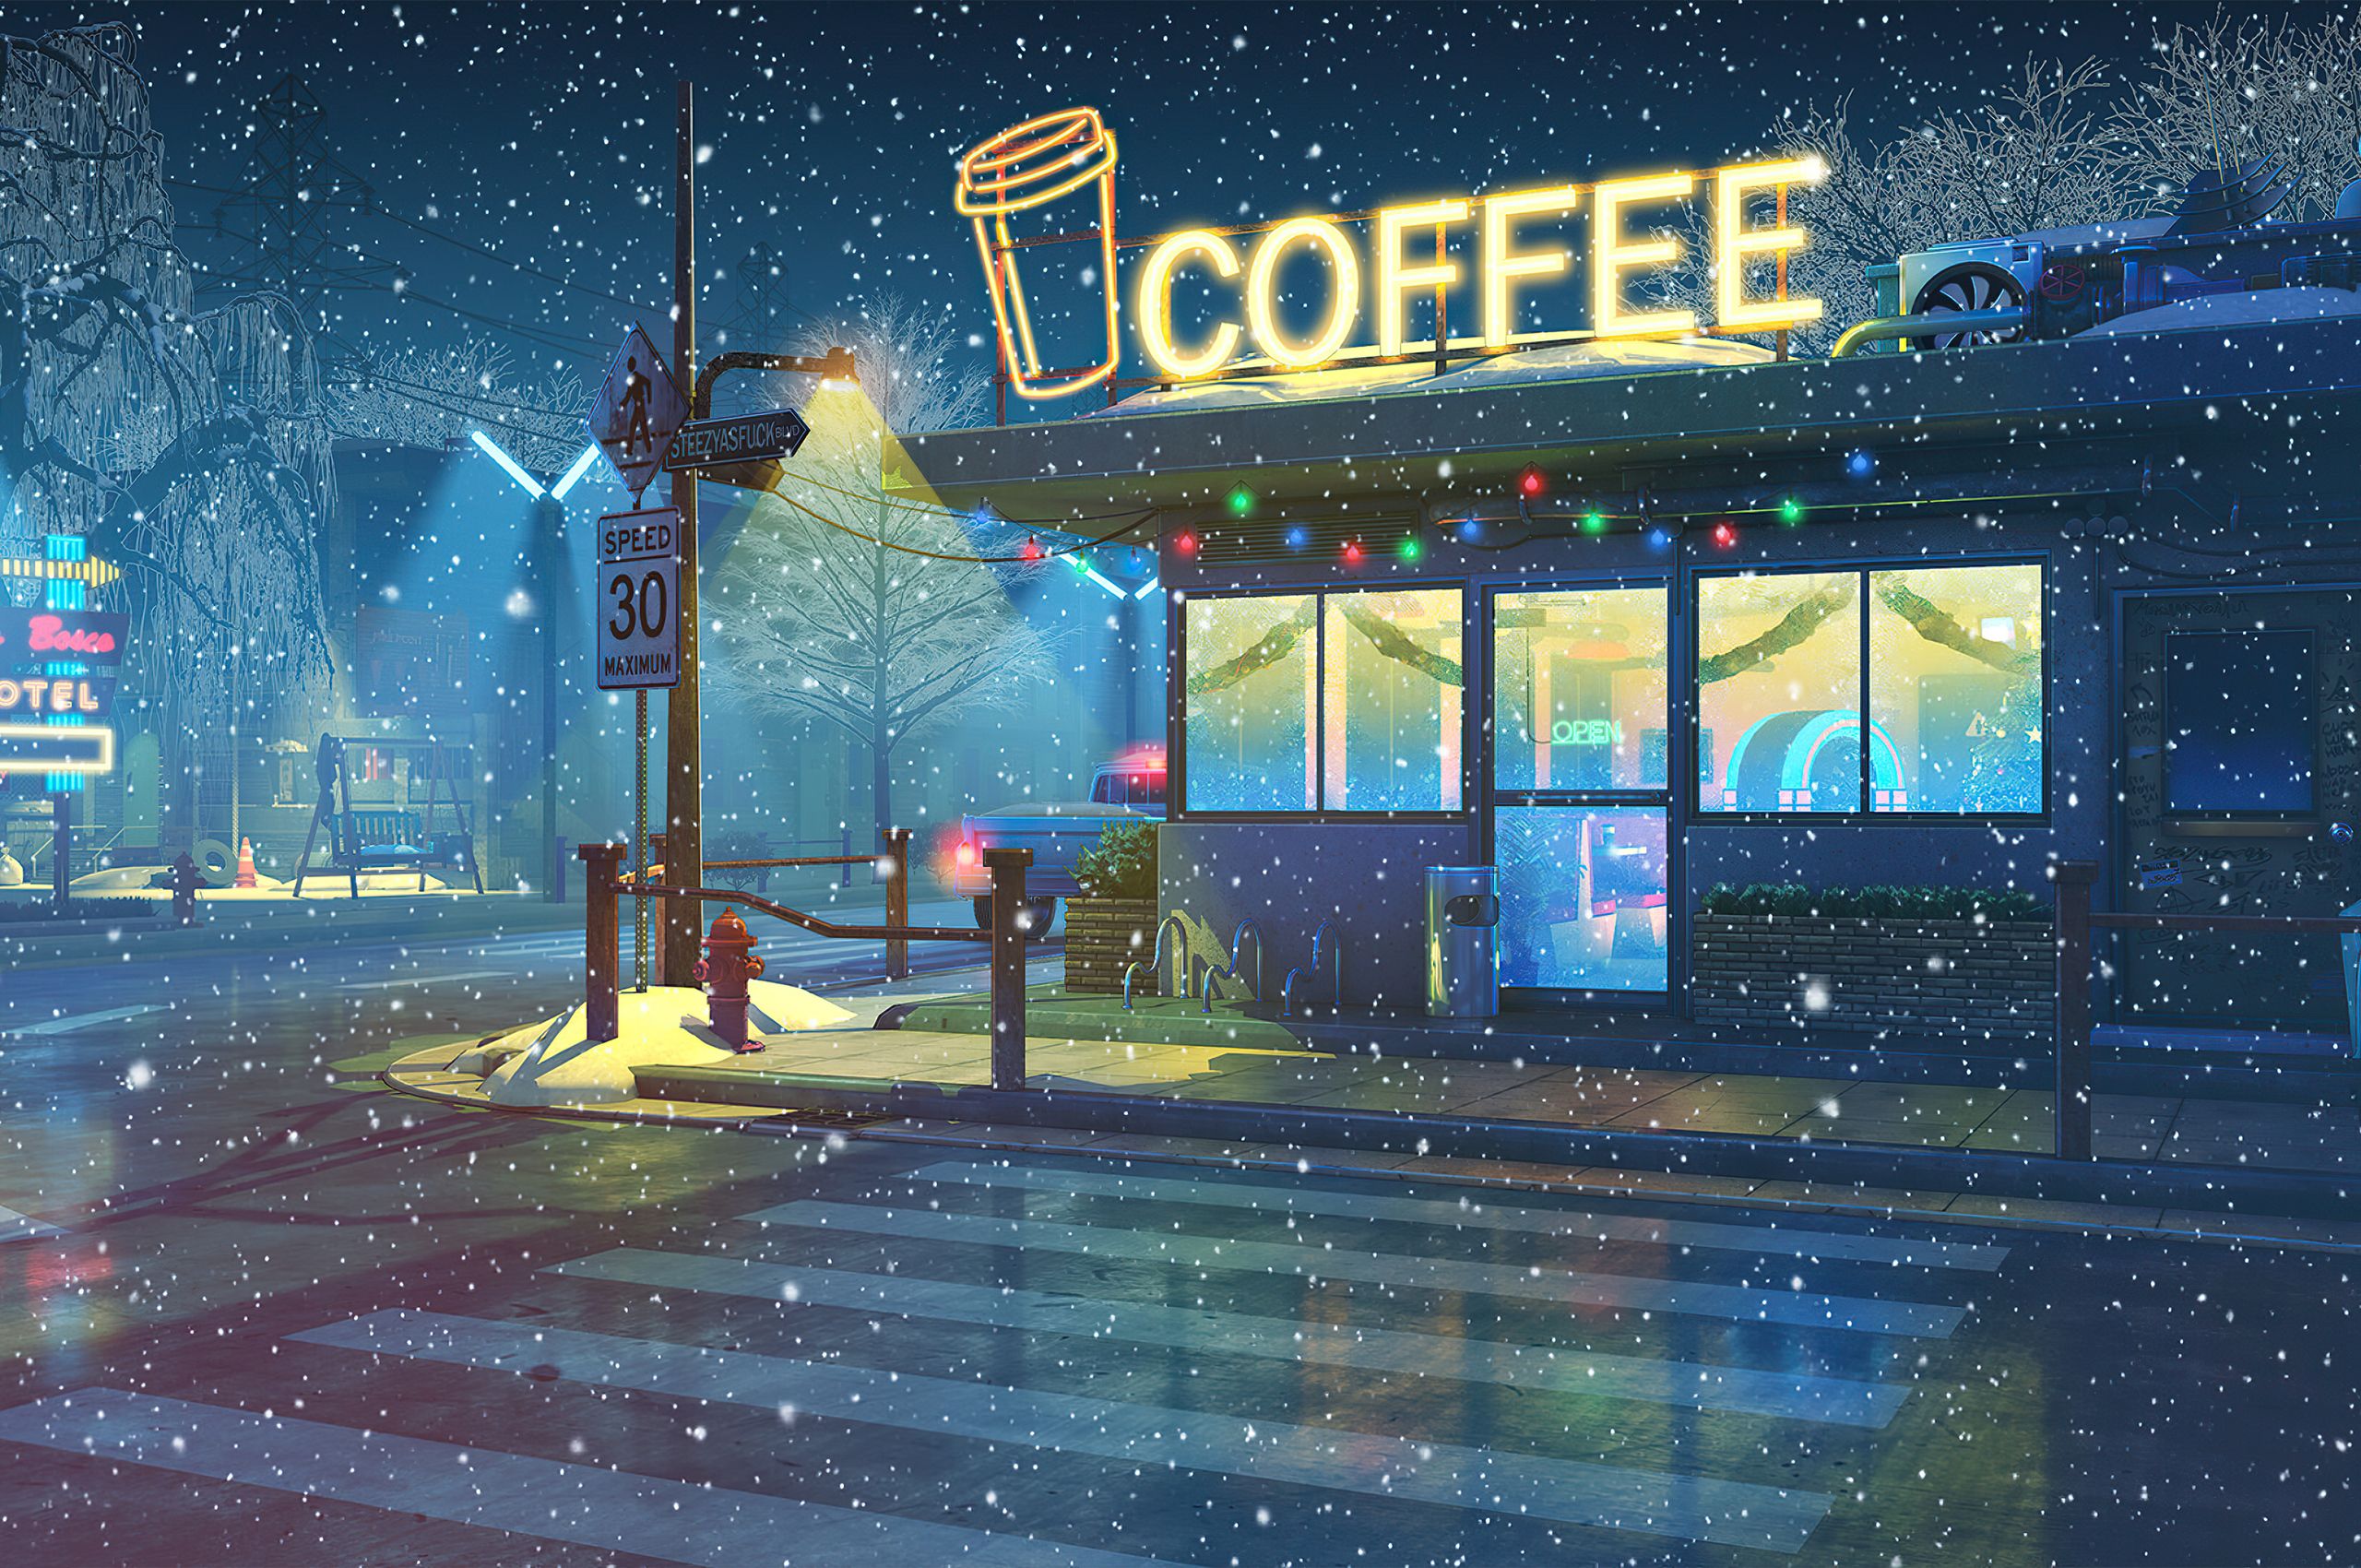 Lo Fi Cafe 4k Chromebook Pixel HD 4k Wallpaper, Image, Background, Photo and Picture